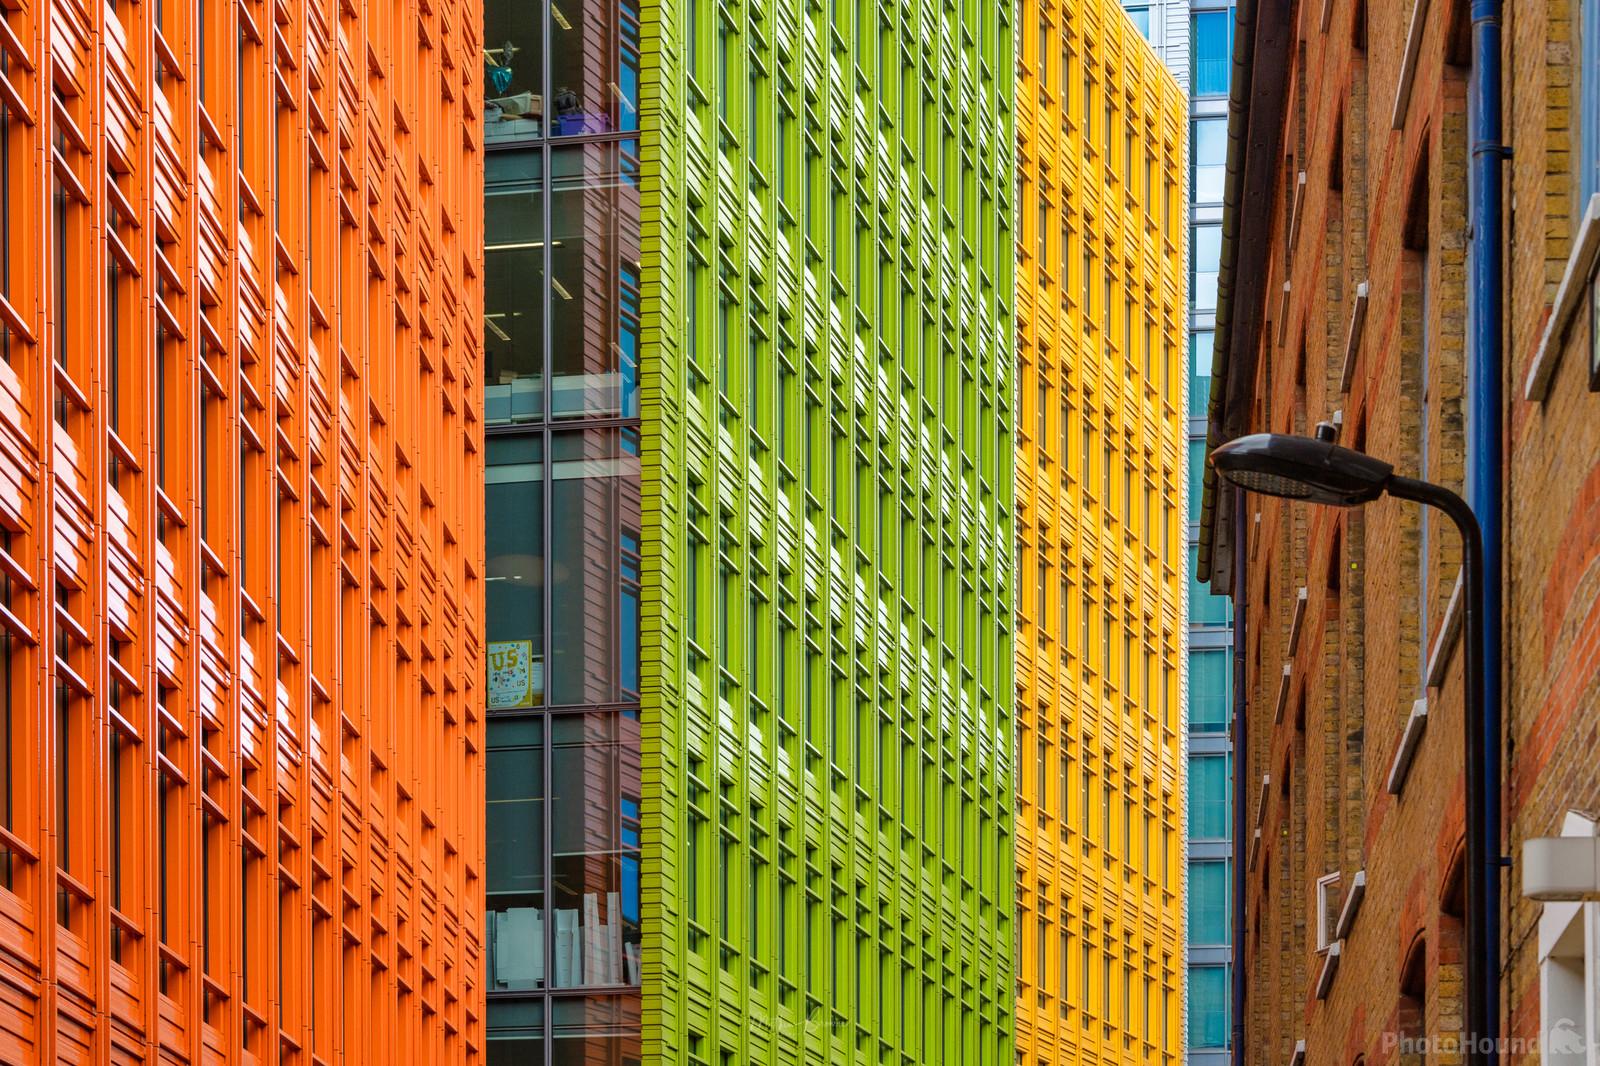 Image of Central St Giles by Mathew Browne